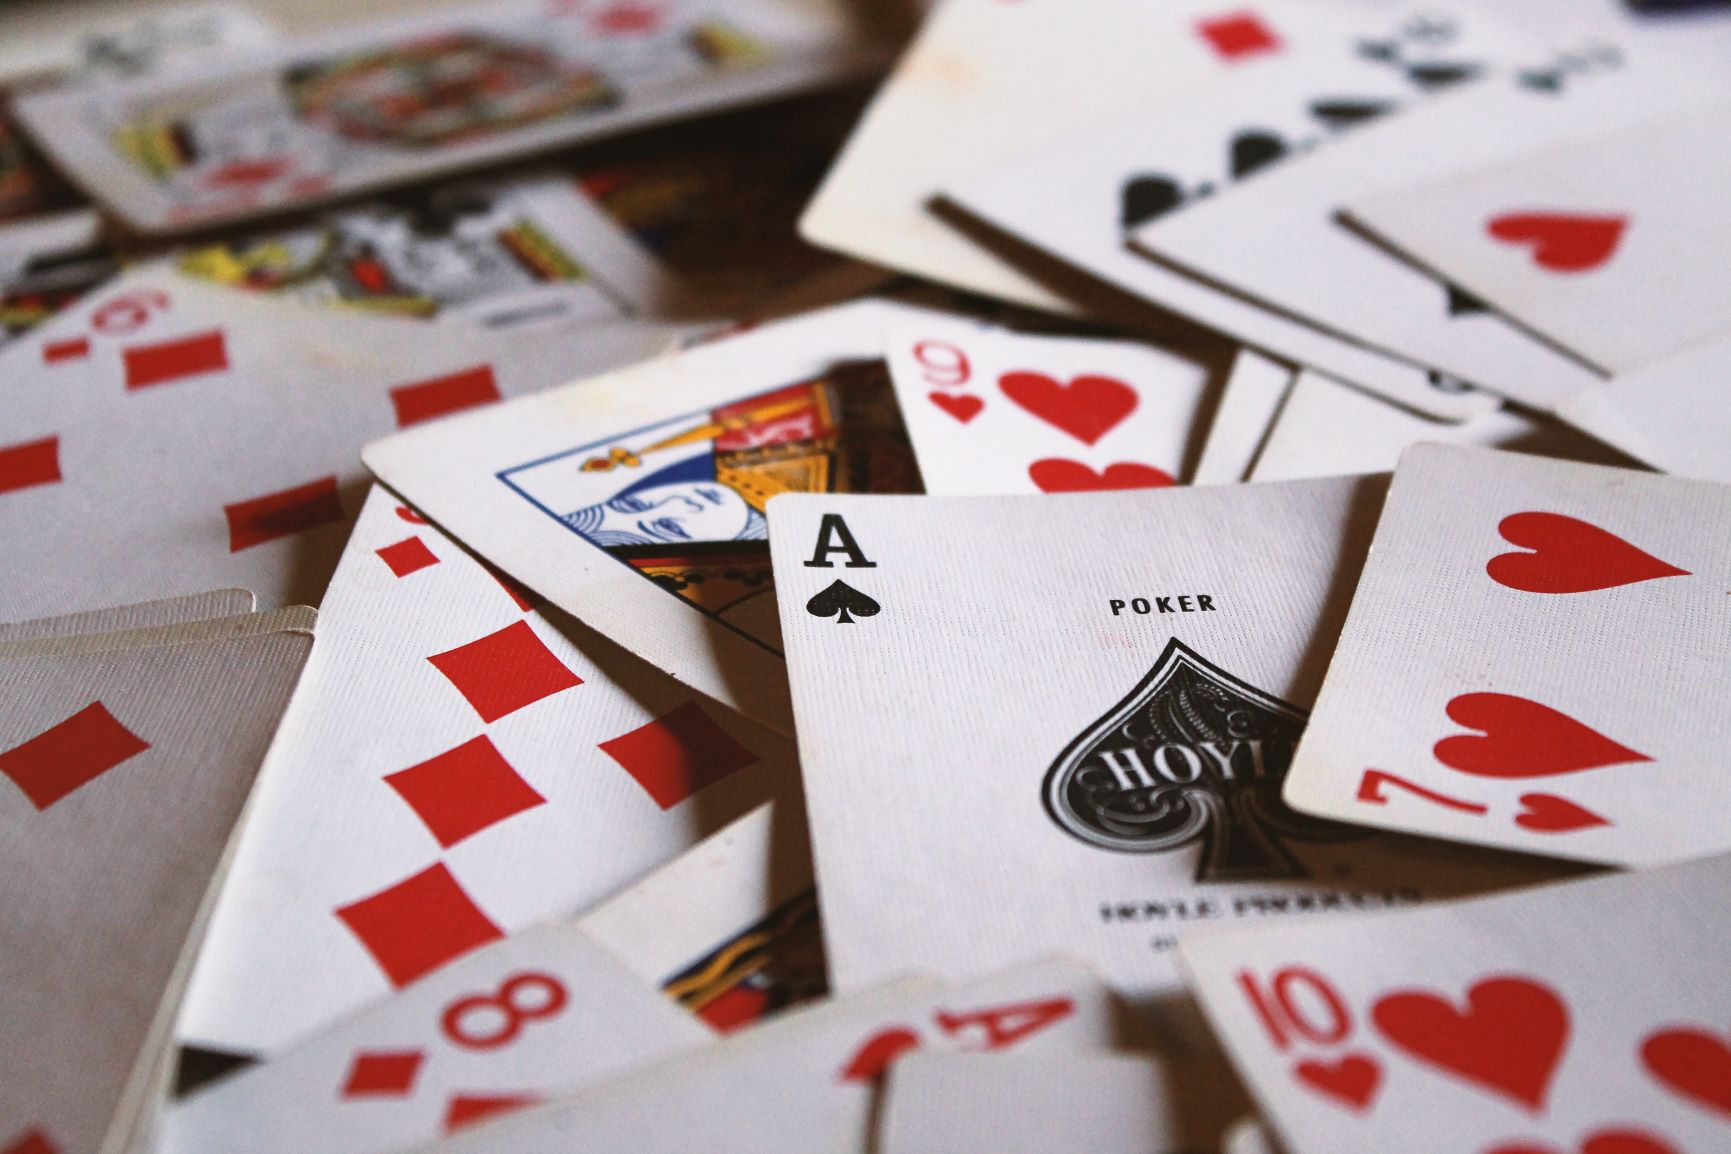 This cop got fired for playing cards and drinking on the job. Photo: Jack Hamilton/Unsplash